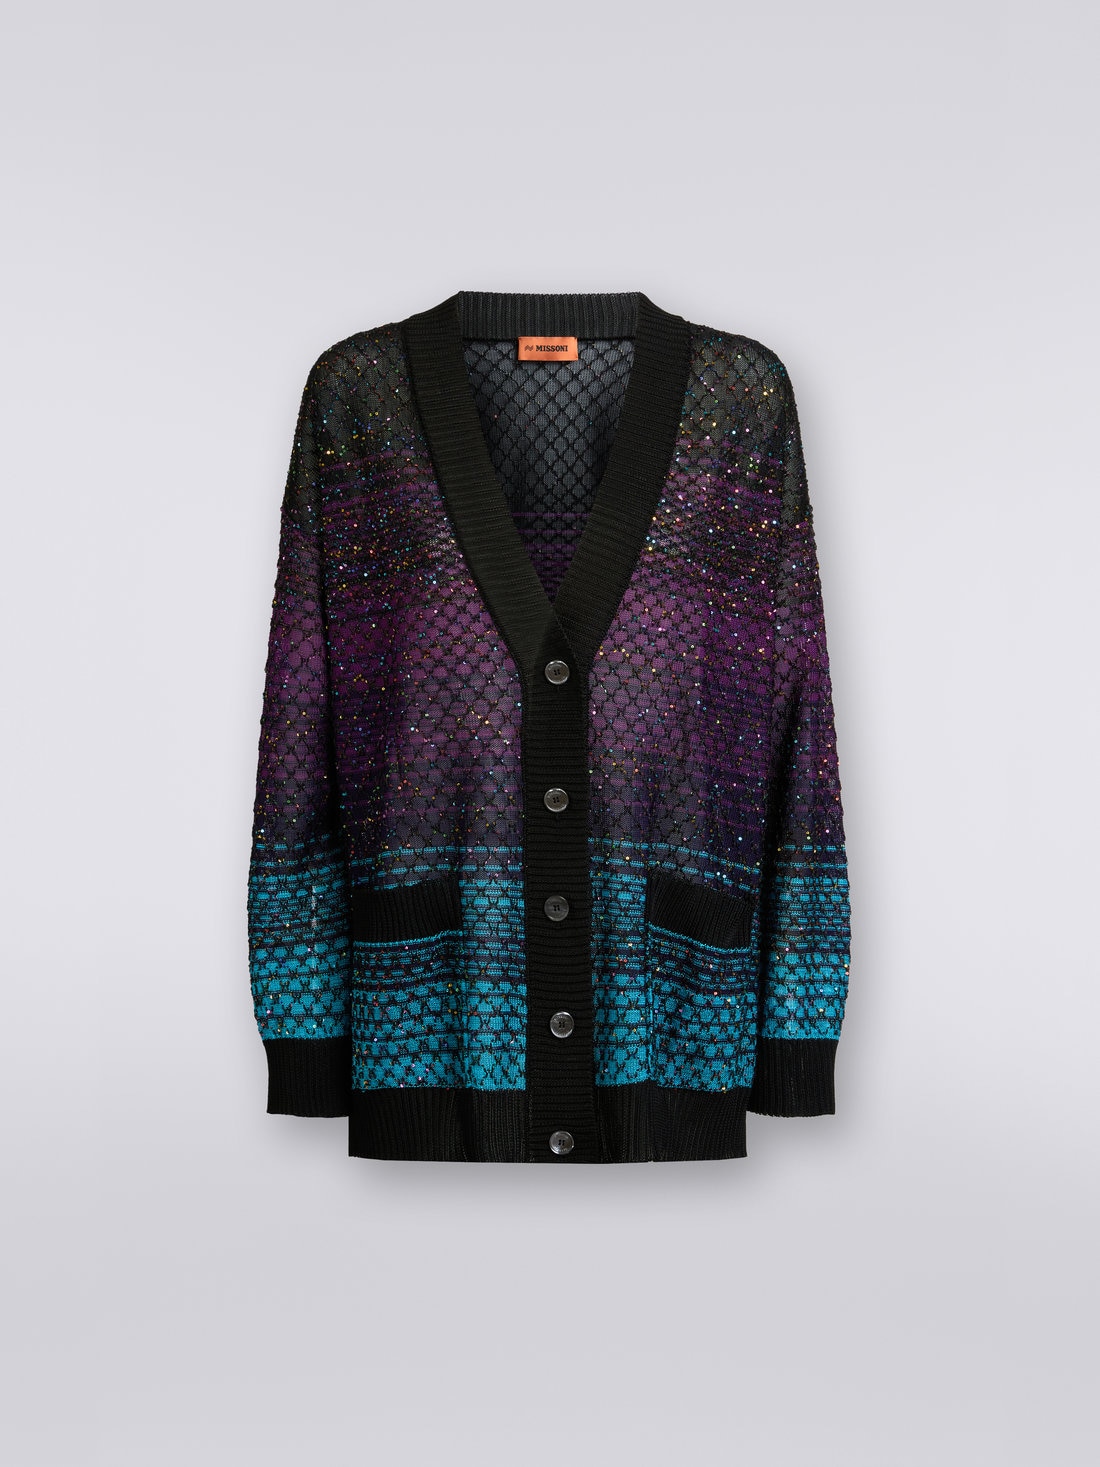 Oversized loose-knit cardigan with sequins, Turquoise, Purple & Black - DS23SM0ZBK022ISM8NJ - 0